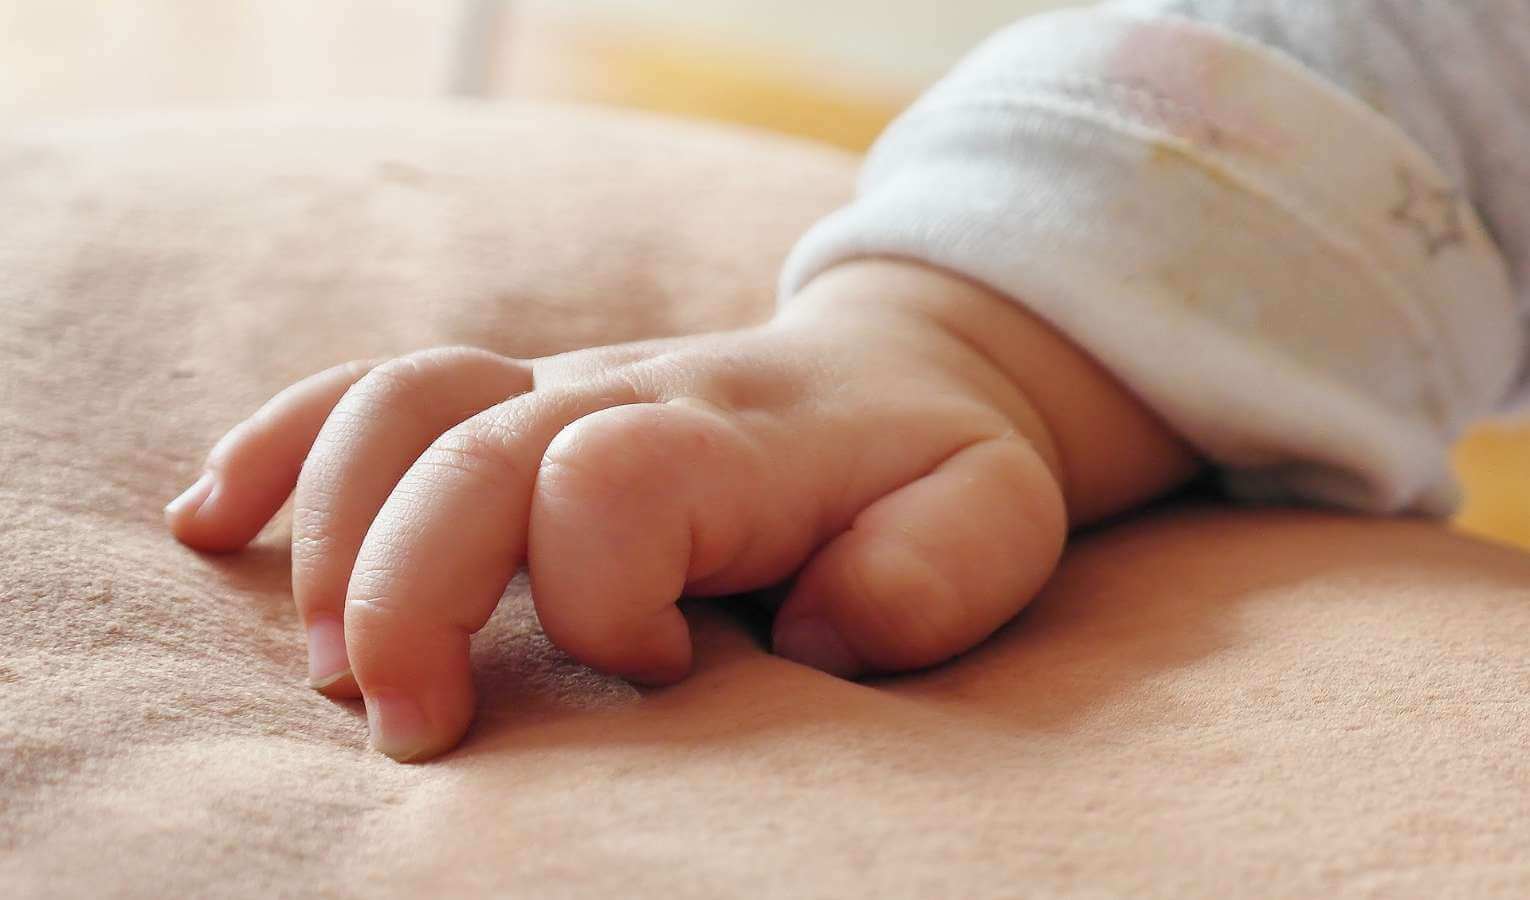 Choosing a baby's name: 4 things to consider